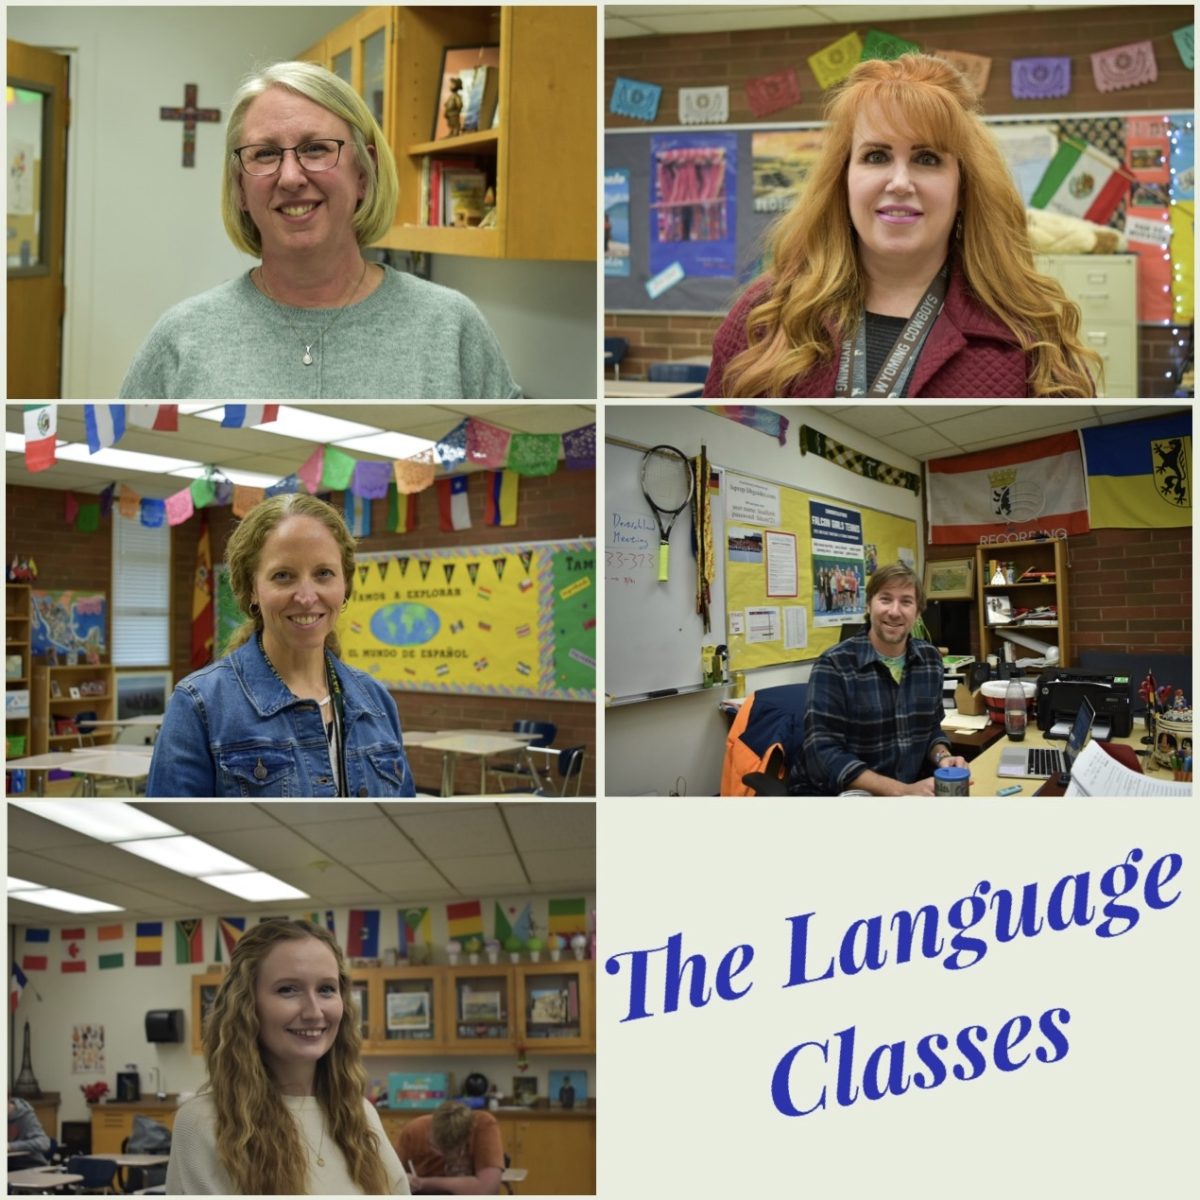 The World Language teachers not only teach their students about the language and culture that comes with it, but they also grow their relationships with their colleagues and learn from each other.